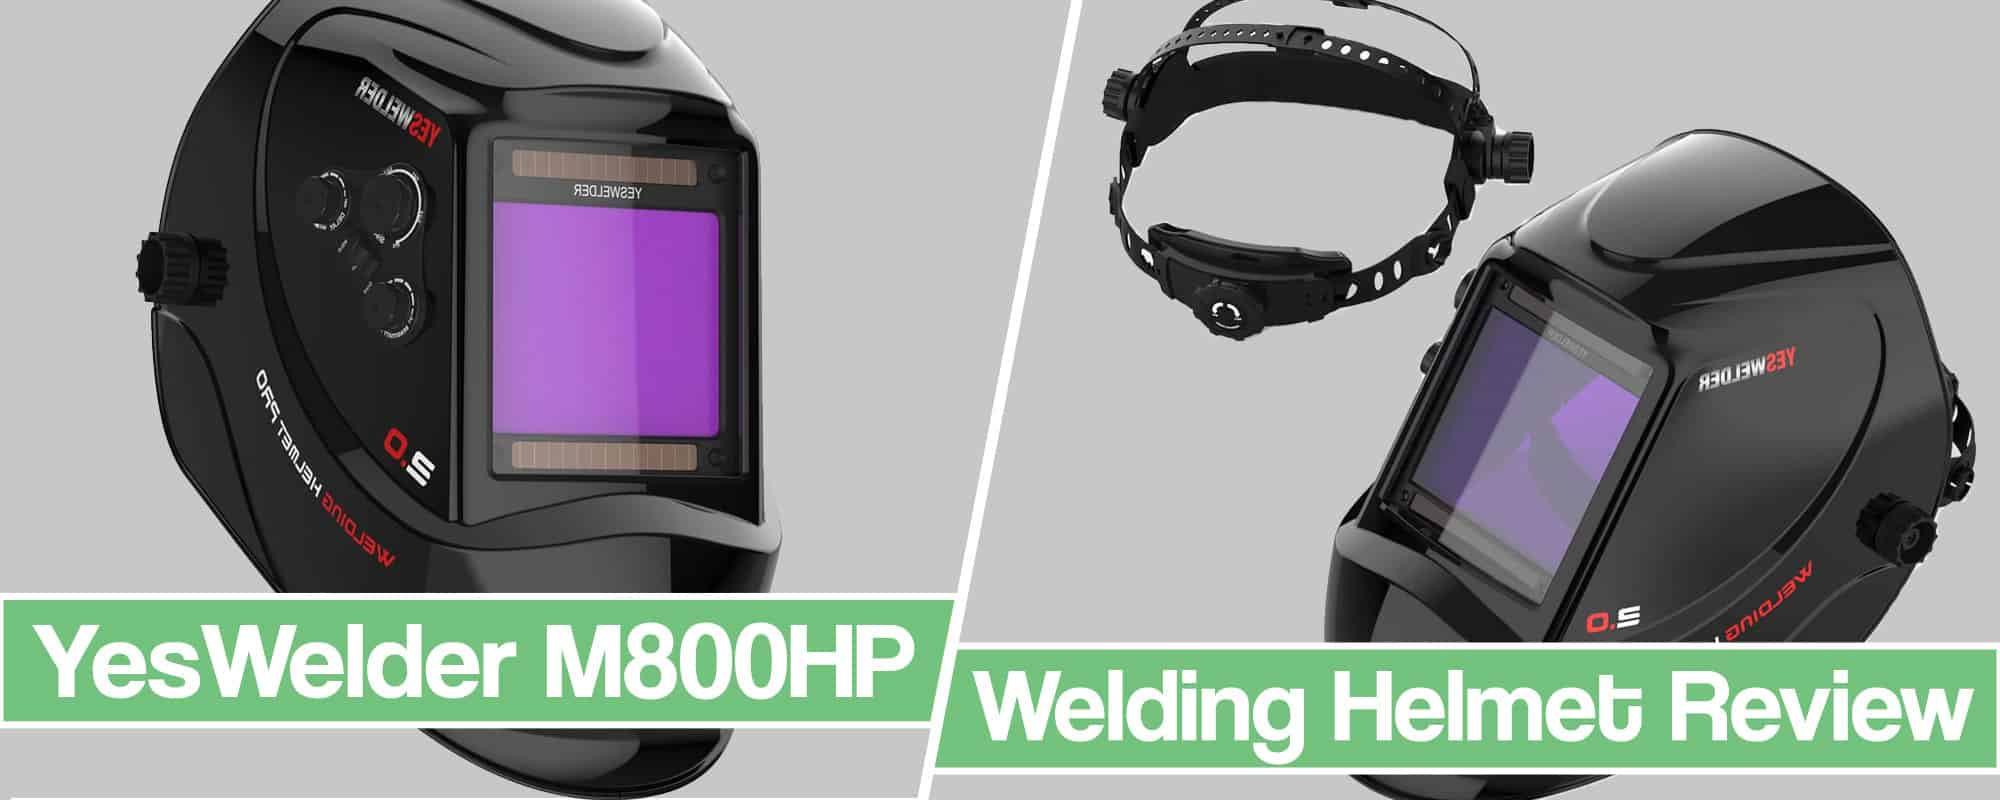 Feature image for YesWelder M800HP Welding Helmet review article